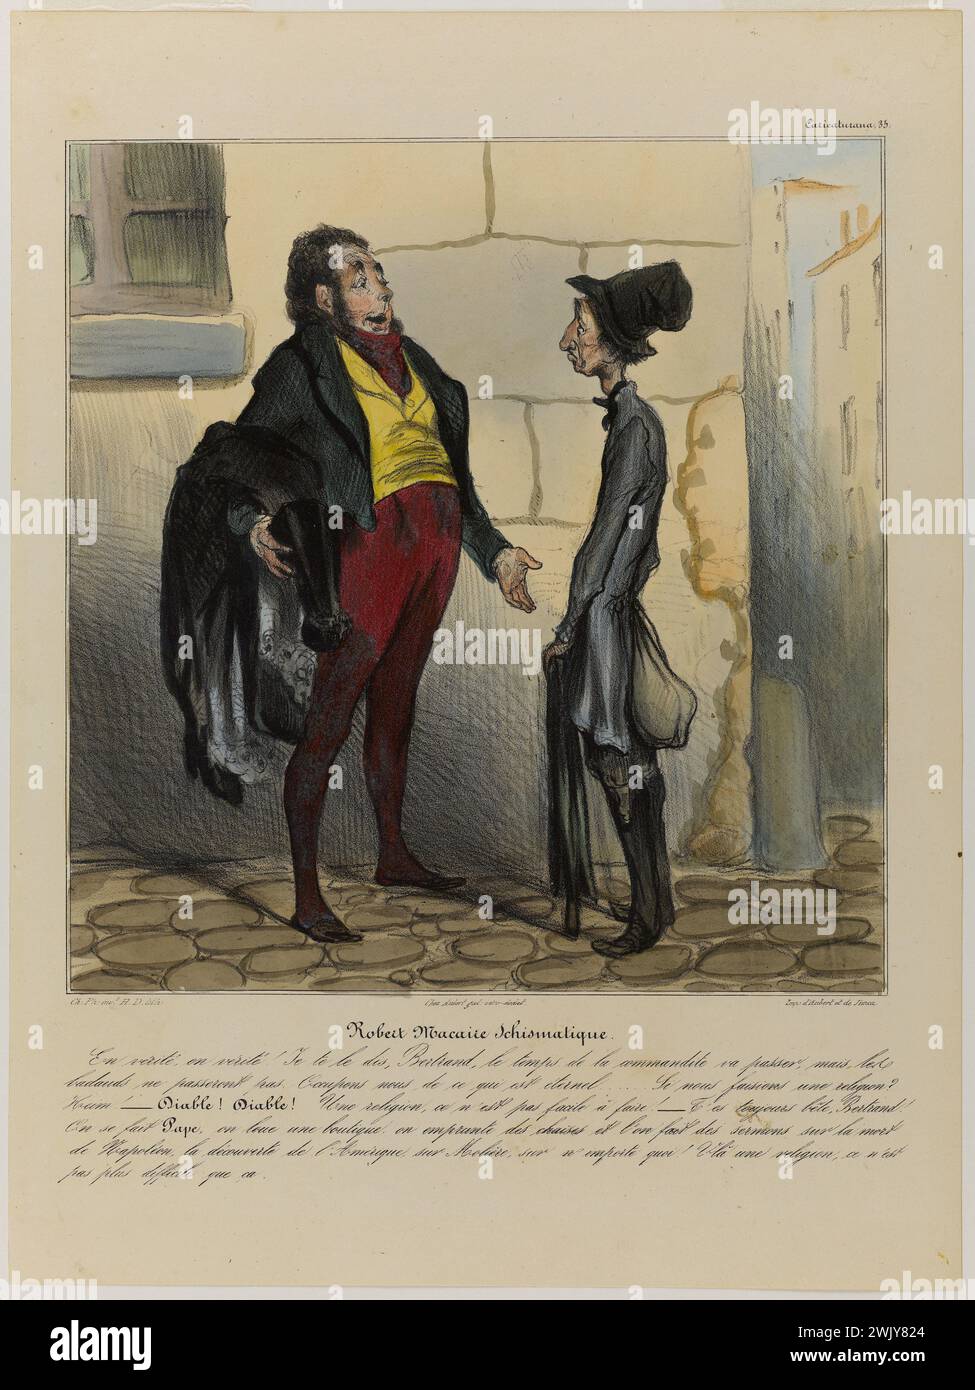 Honoré Daumier (1808-1879). 'Robert Macaire Schismatique'. Colored and erased lithography. 1836-1838. Paris, Balzac house. 56111-9 Crook, gommee, lithography colored, lean, character, schismatic Stock Photo